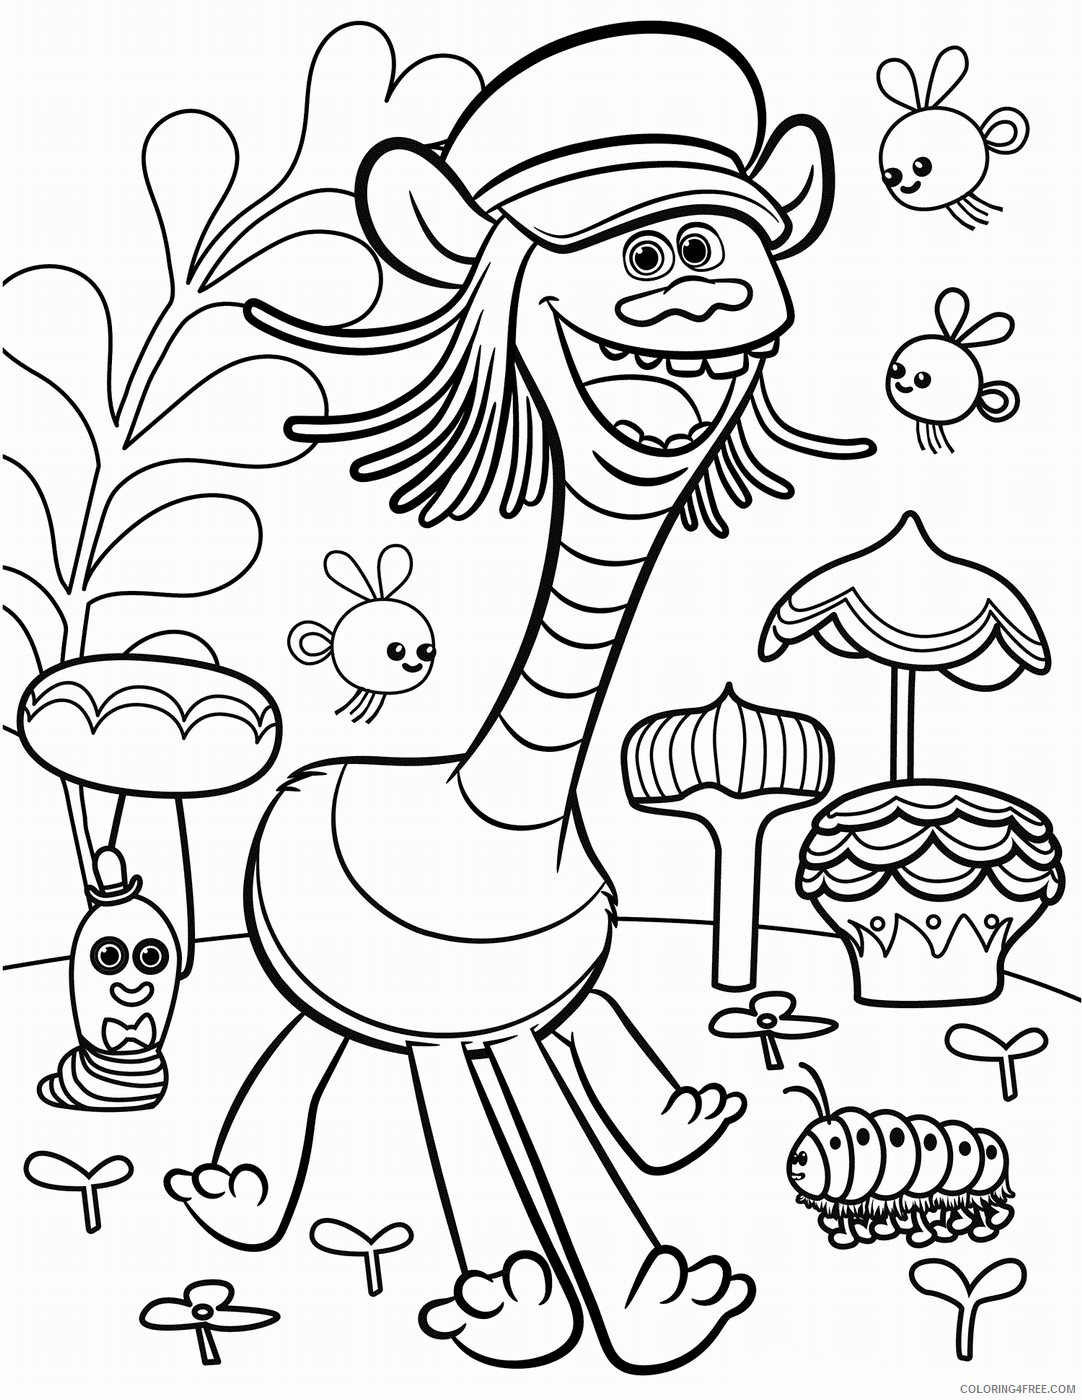 Trolls Coloring Pages TV Film trolls 1 Printable 2020 10815 Coloring4free